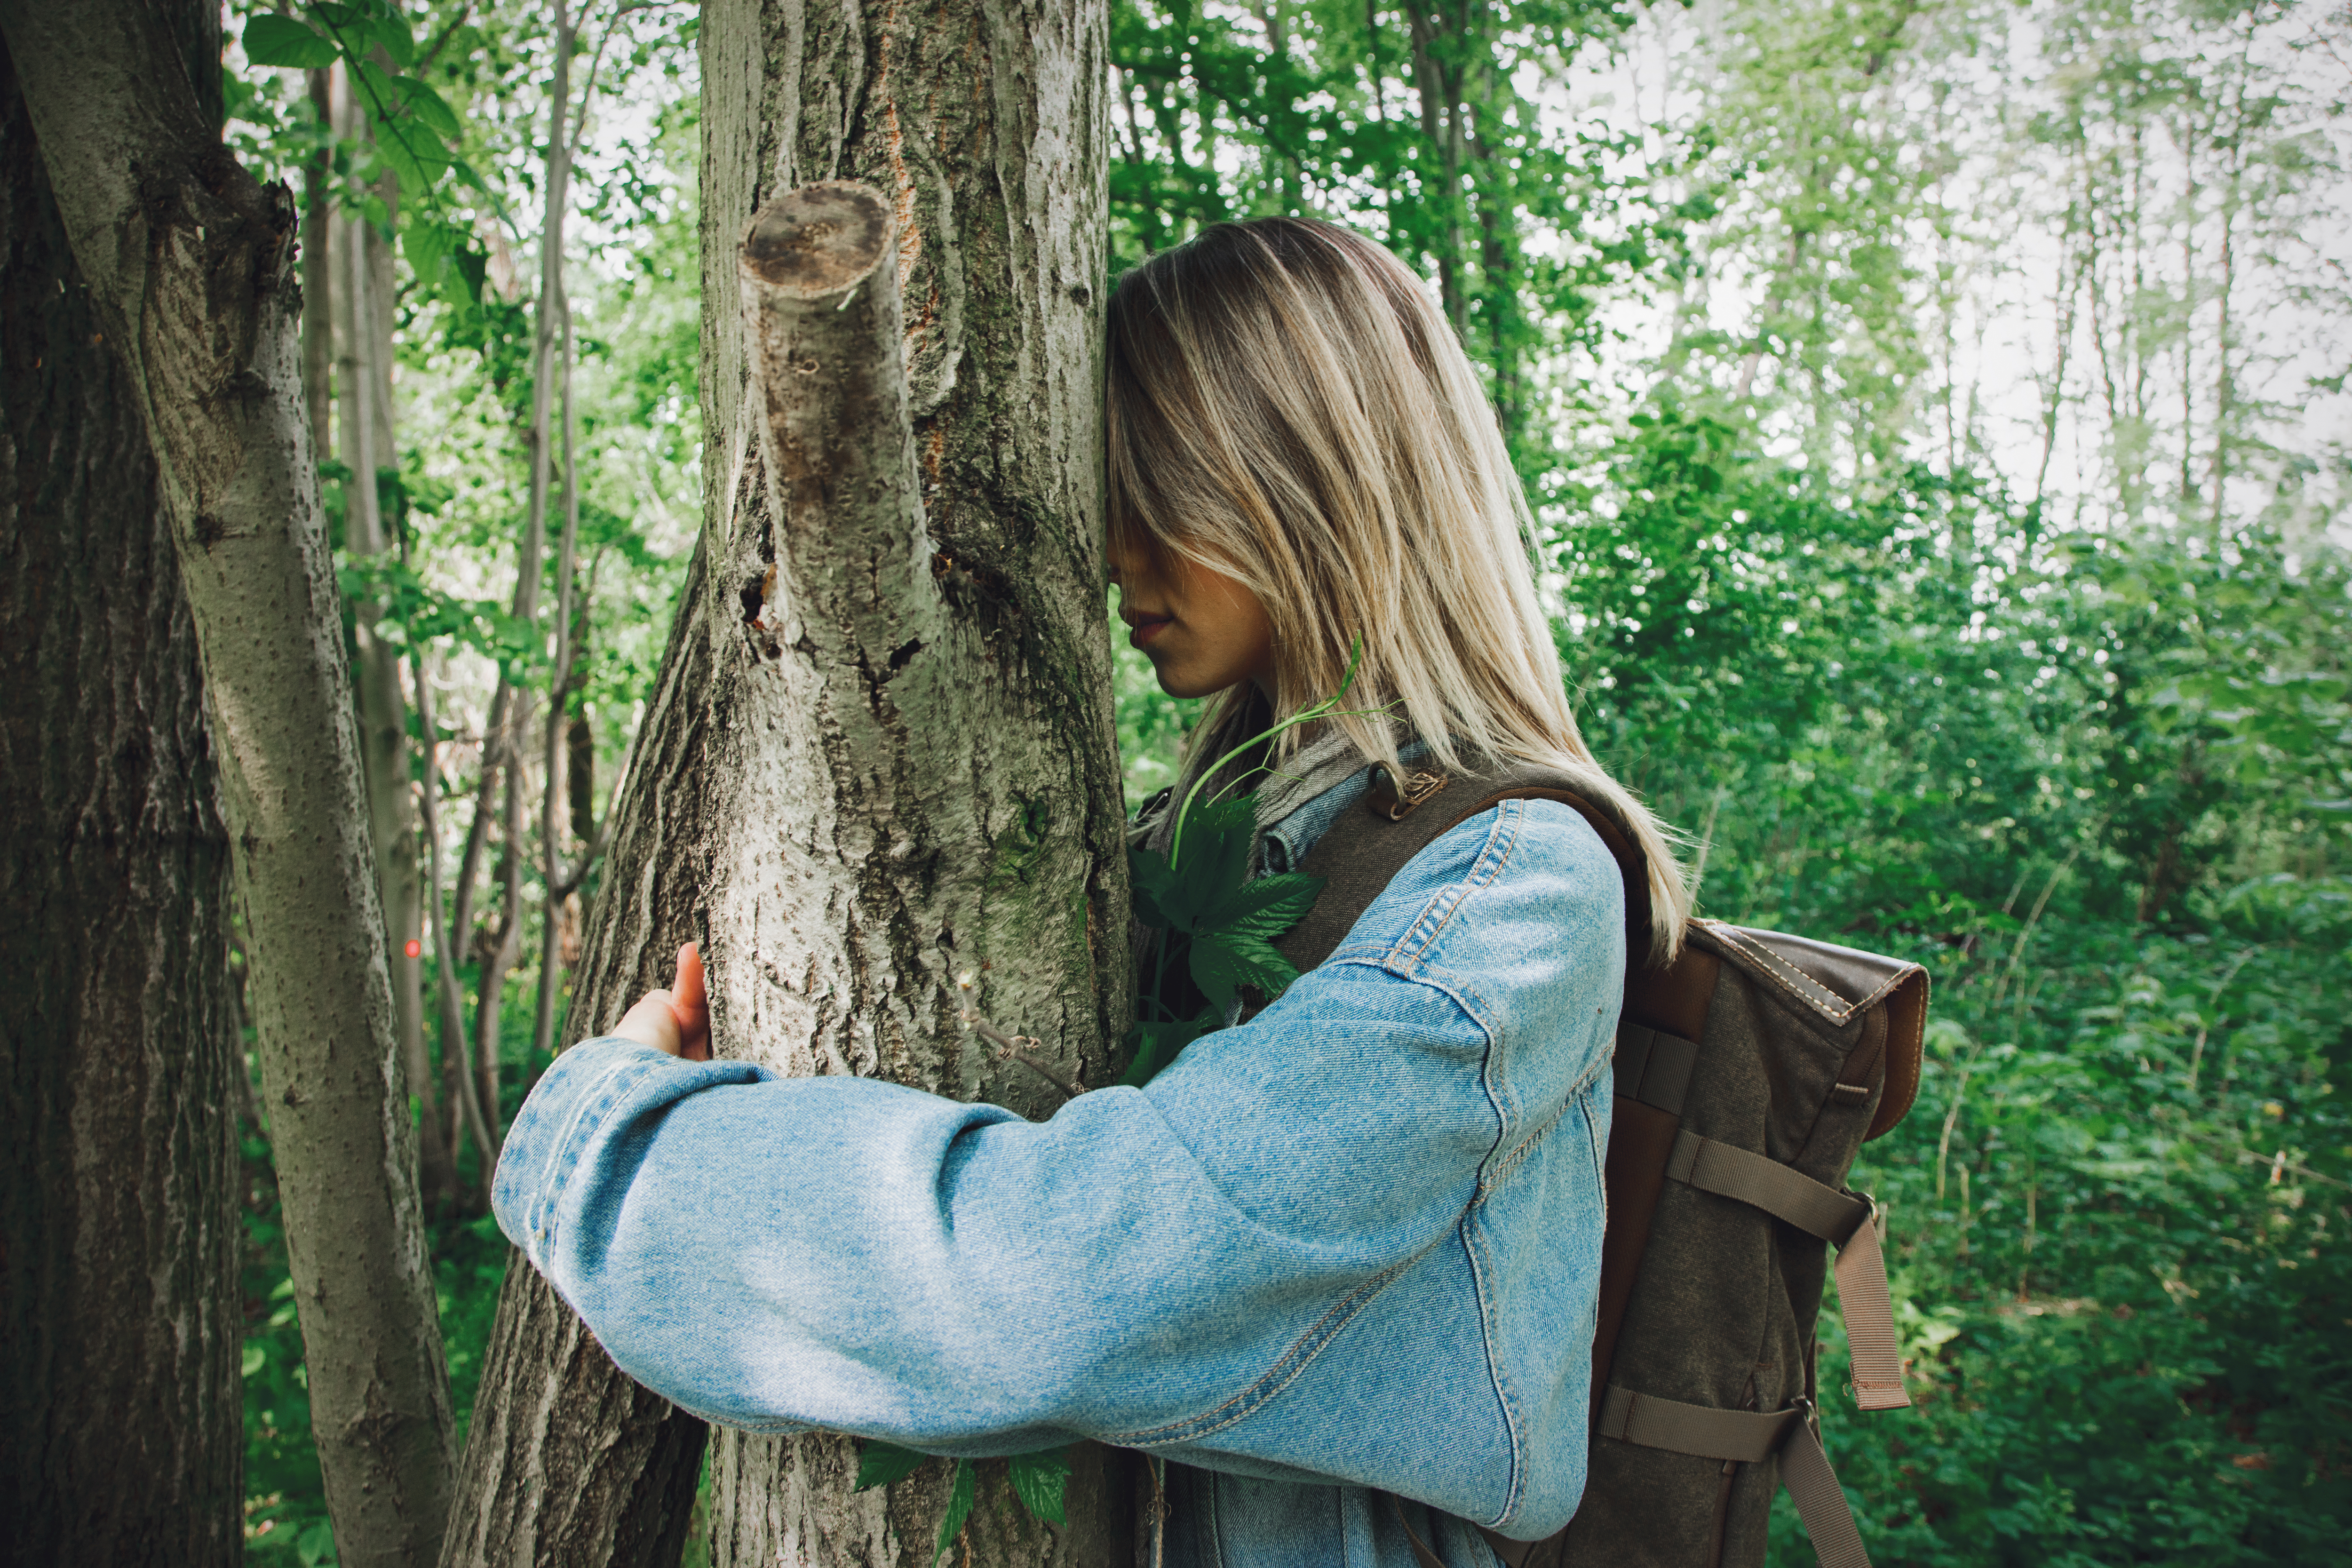 Woman-with-backpack-hugging-a-tree-in-forest-2022-01-12-17-03-22-utc